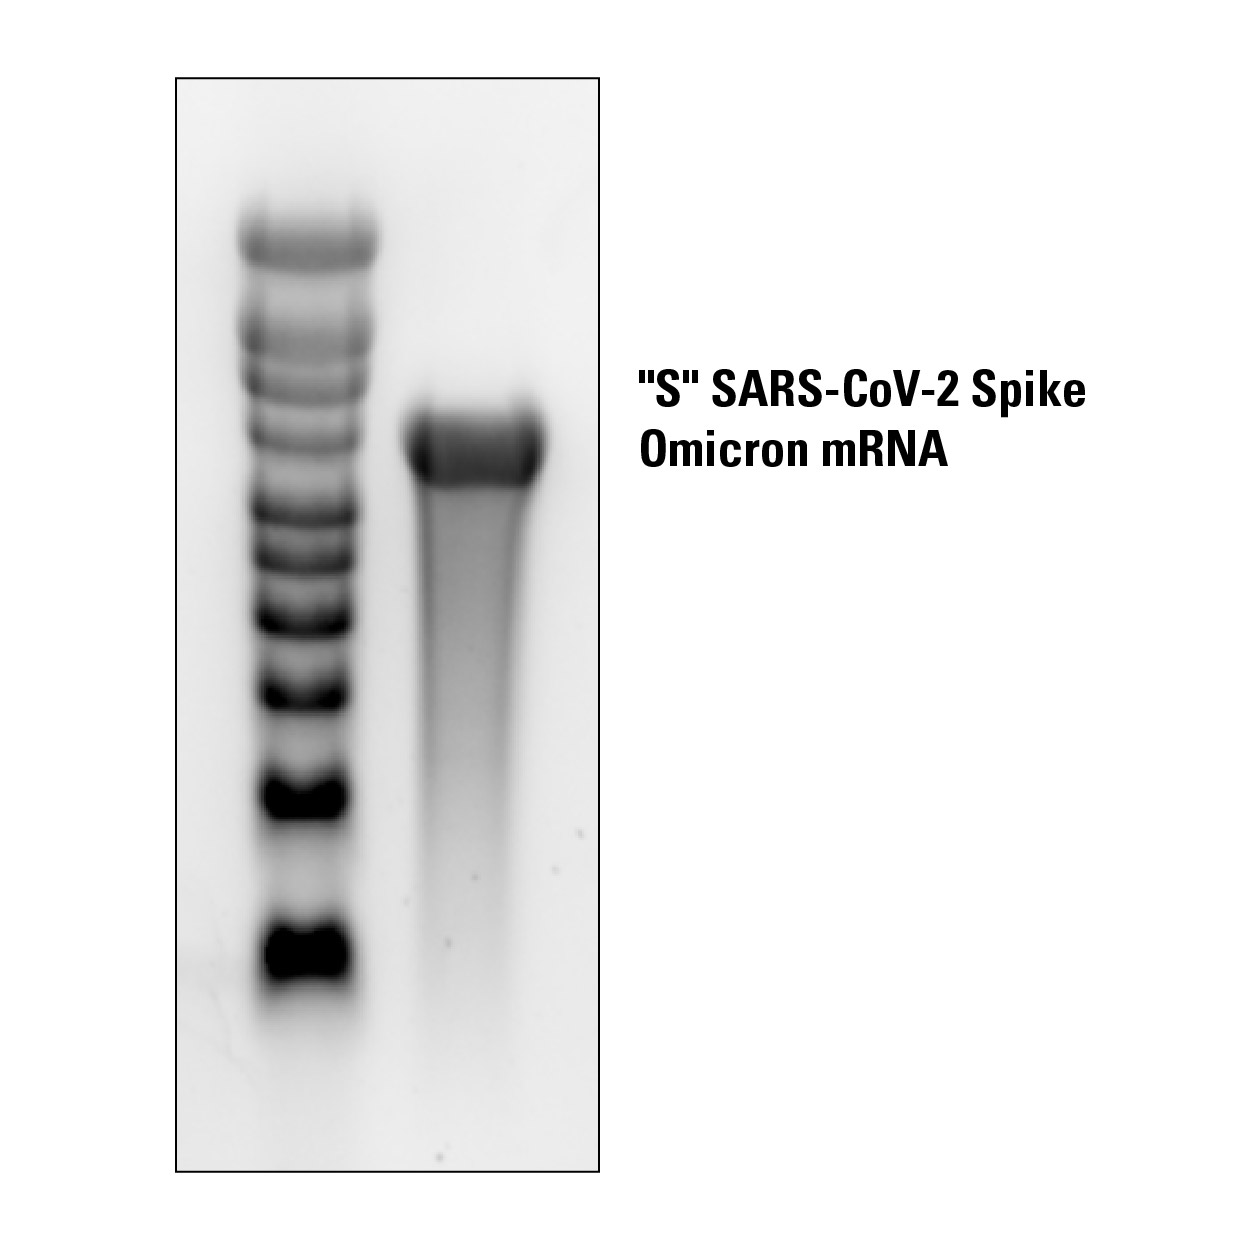 The "S" SARS-CoV-2 Omicron mRNA is a high-quality mRNA that migrates primarily as a single species